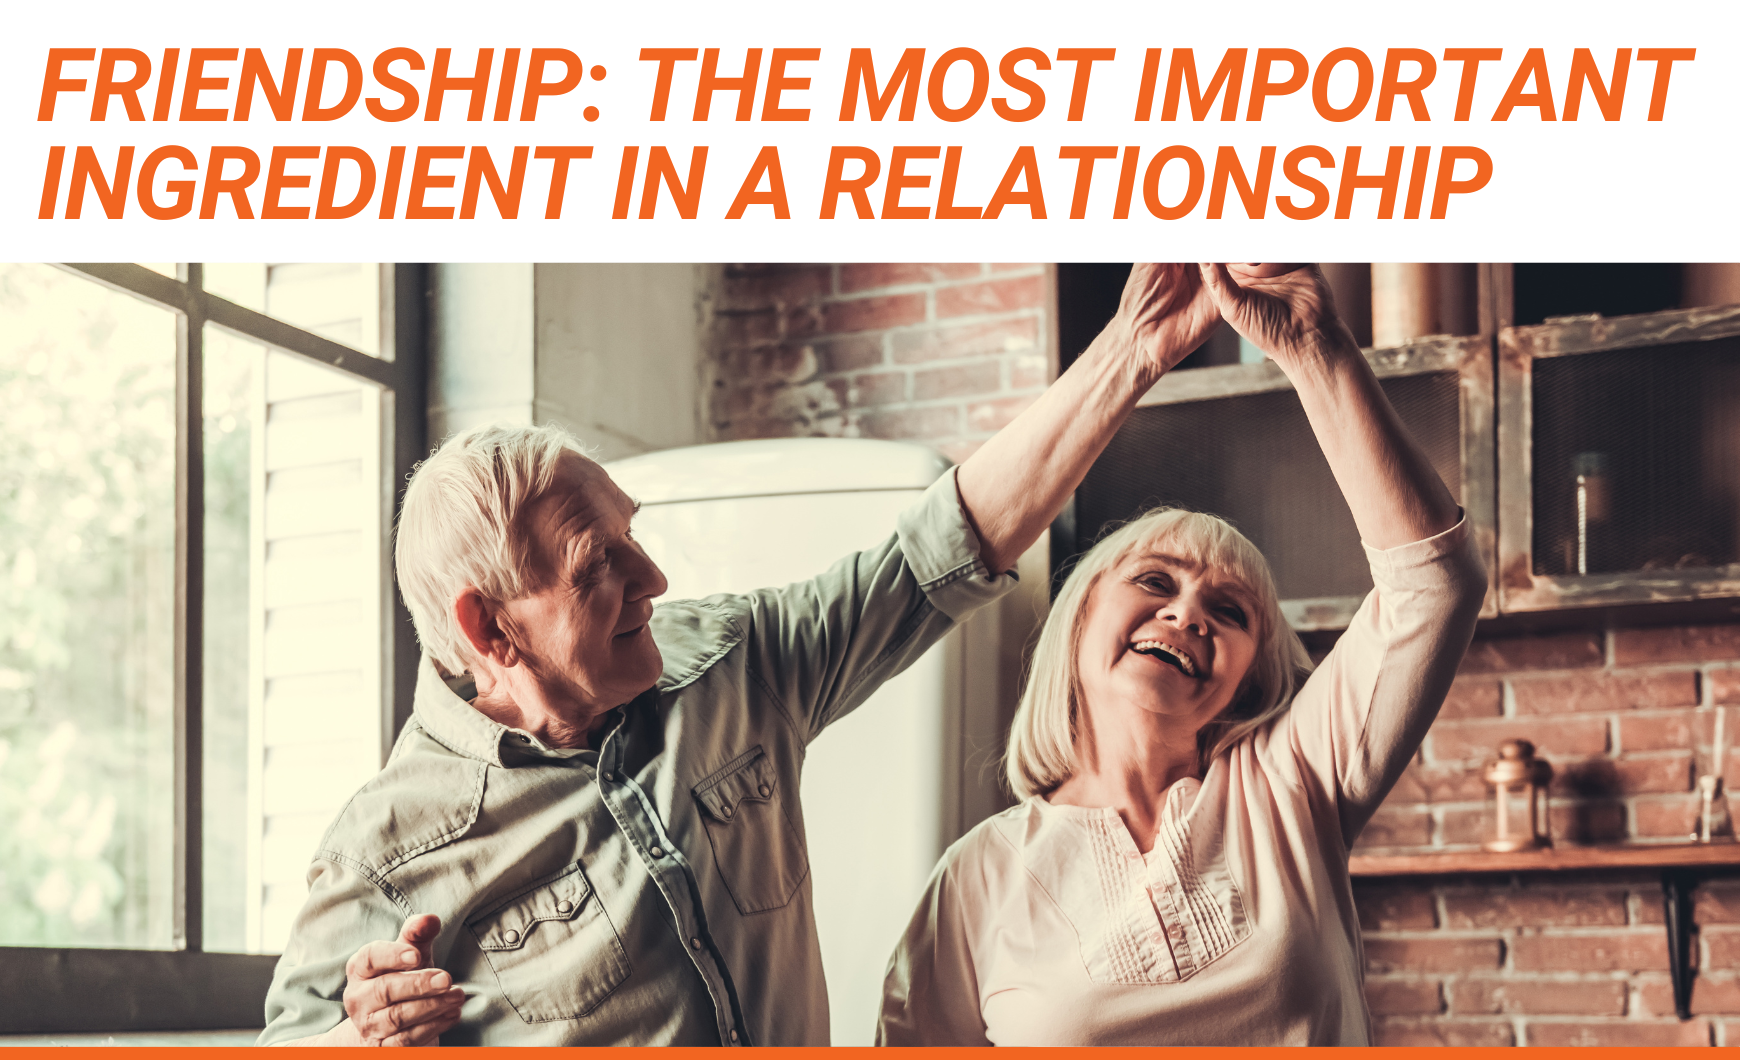 Orange text that reads "Friendship: The Most Important Ingredient in a Relationship" above a stock photo of an elderly white heterosexual couple dancing in their kitchen, smiling.